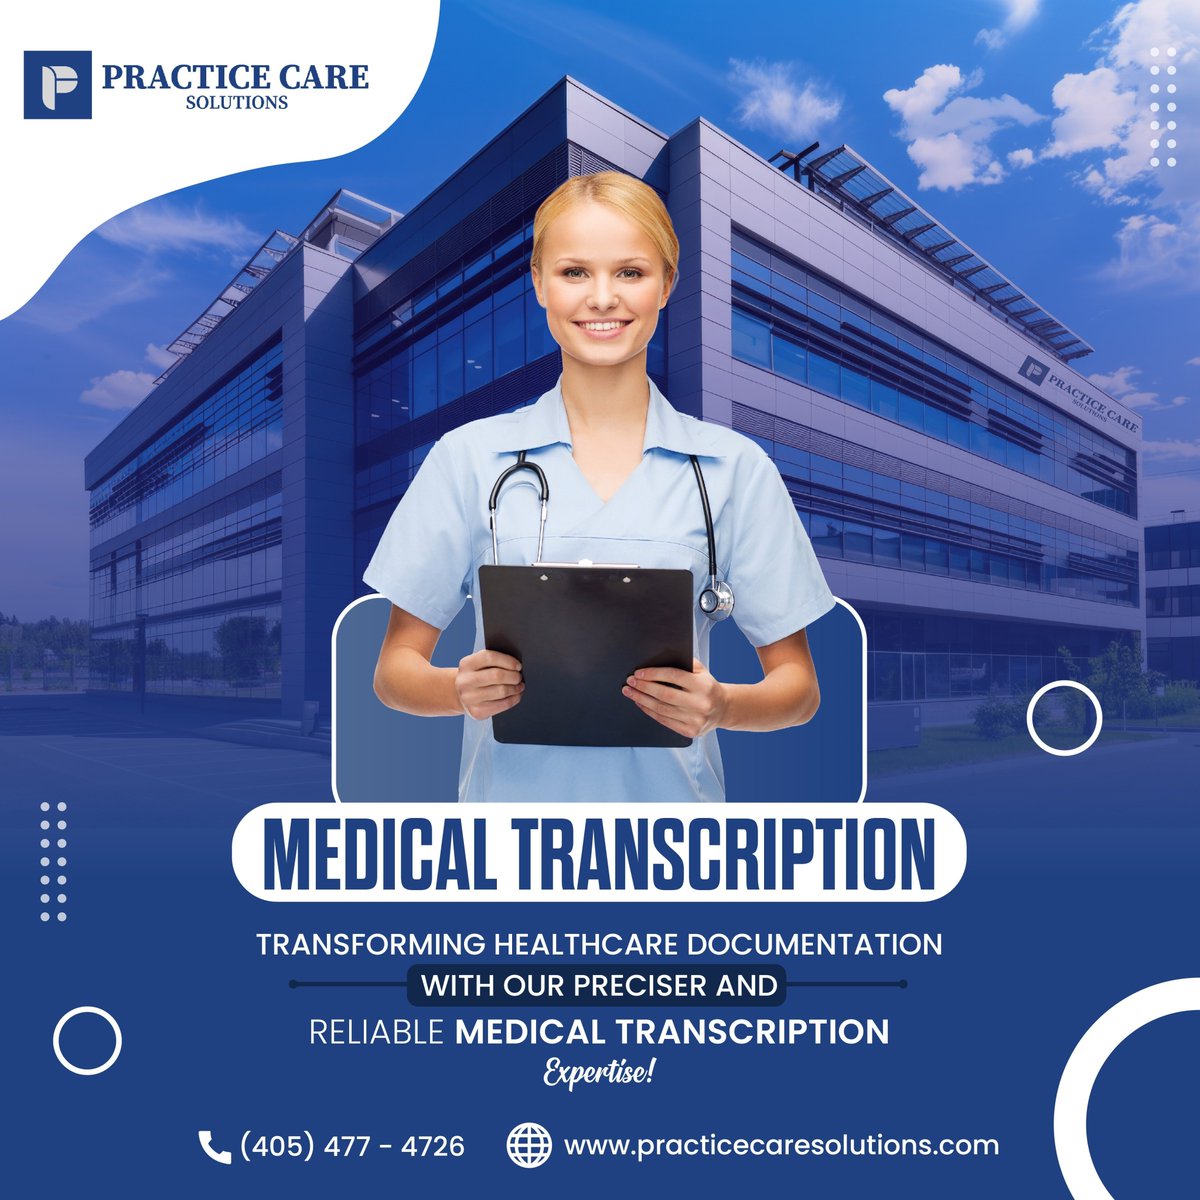 Say goodbye to time-consuming paperwork and hello to accurate, hassle-free records with our medical transcription expertise! 📝📝
At Practice Care, we ensure accuracy and reliability.
#MedicalTranscription #paperworkfree #accuraterecord #practicecare